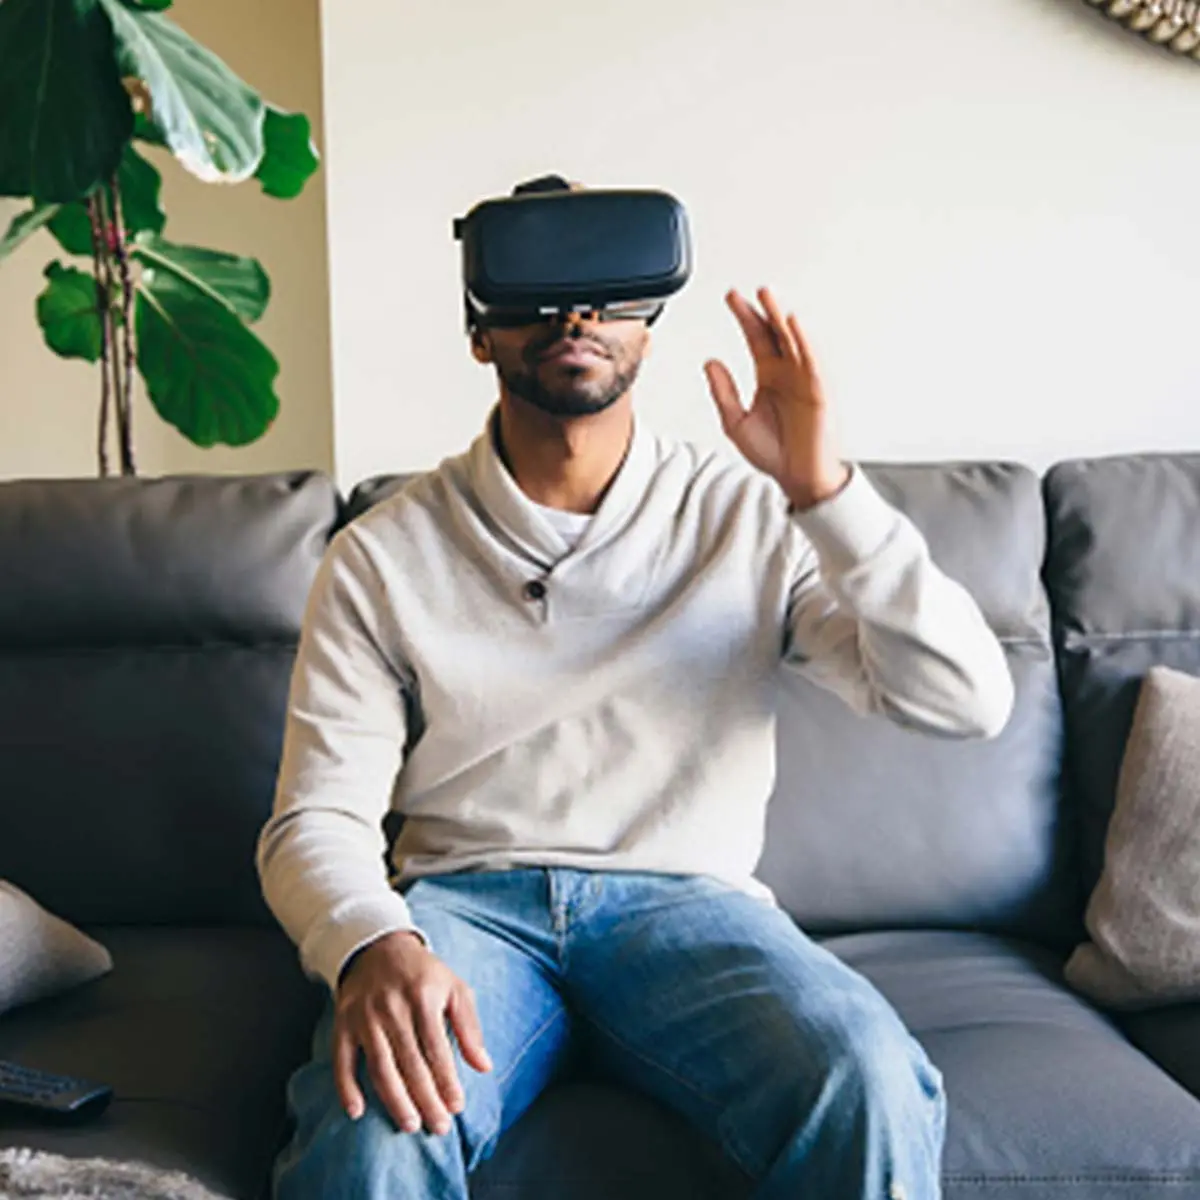 Man sitting on couch using VR headset